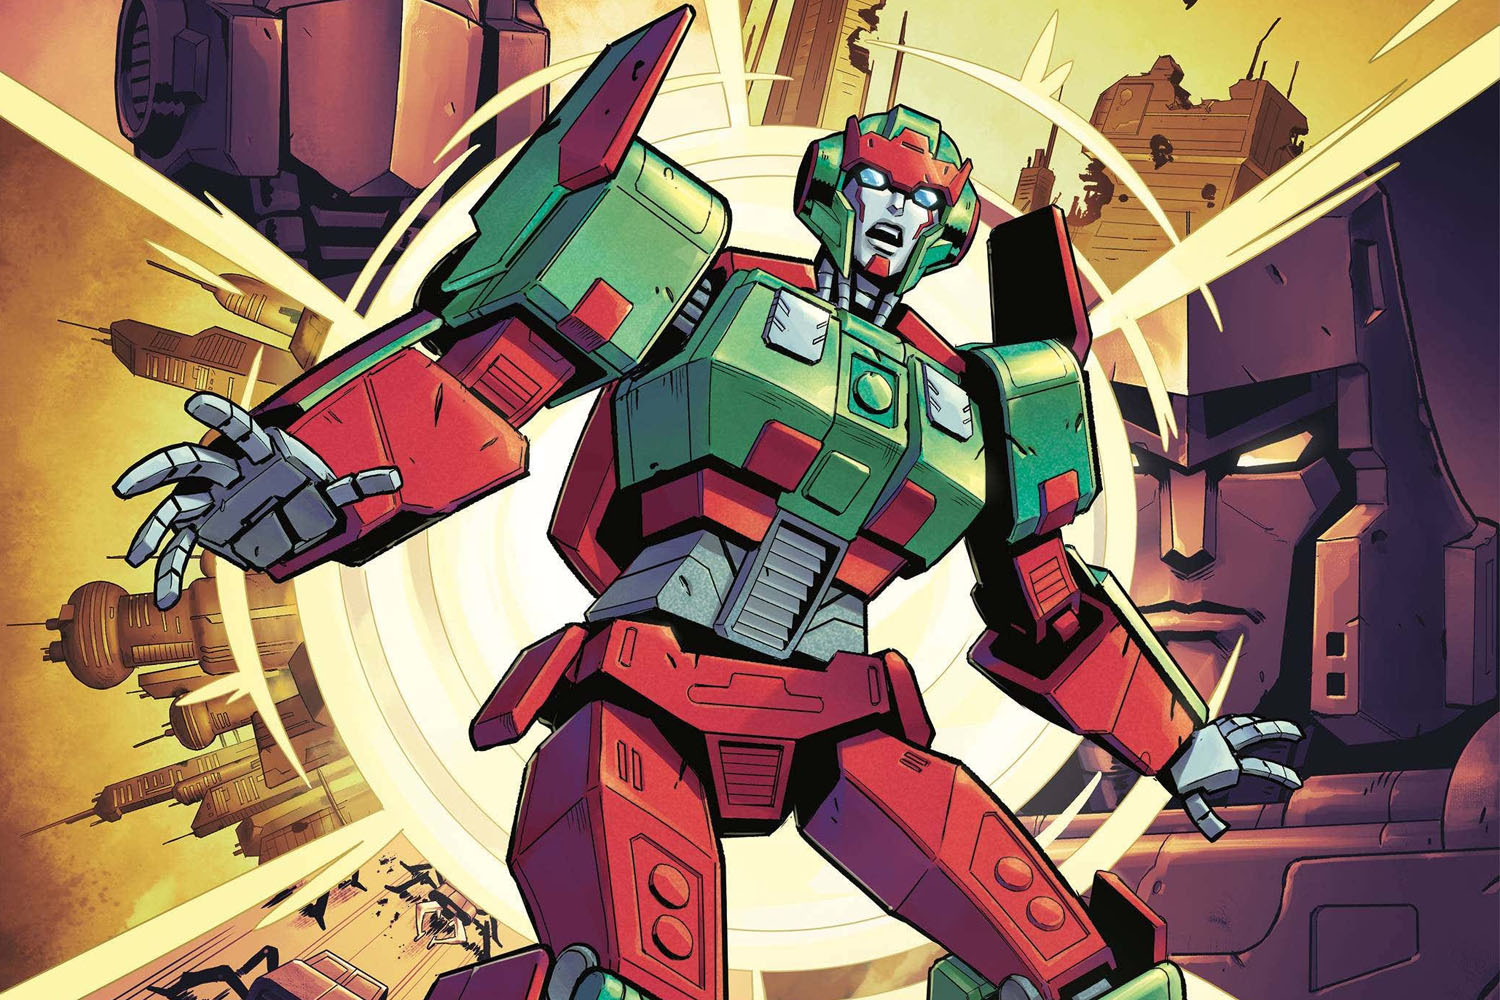 'Transformers' #31 takes us on a wild ride